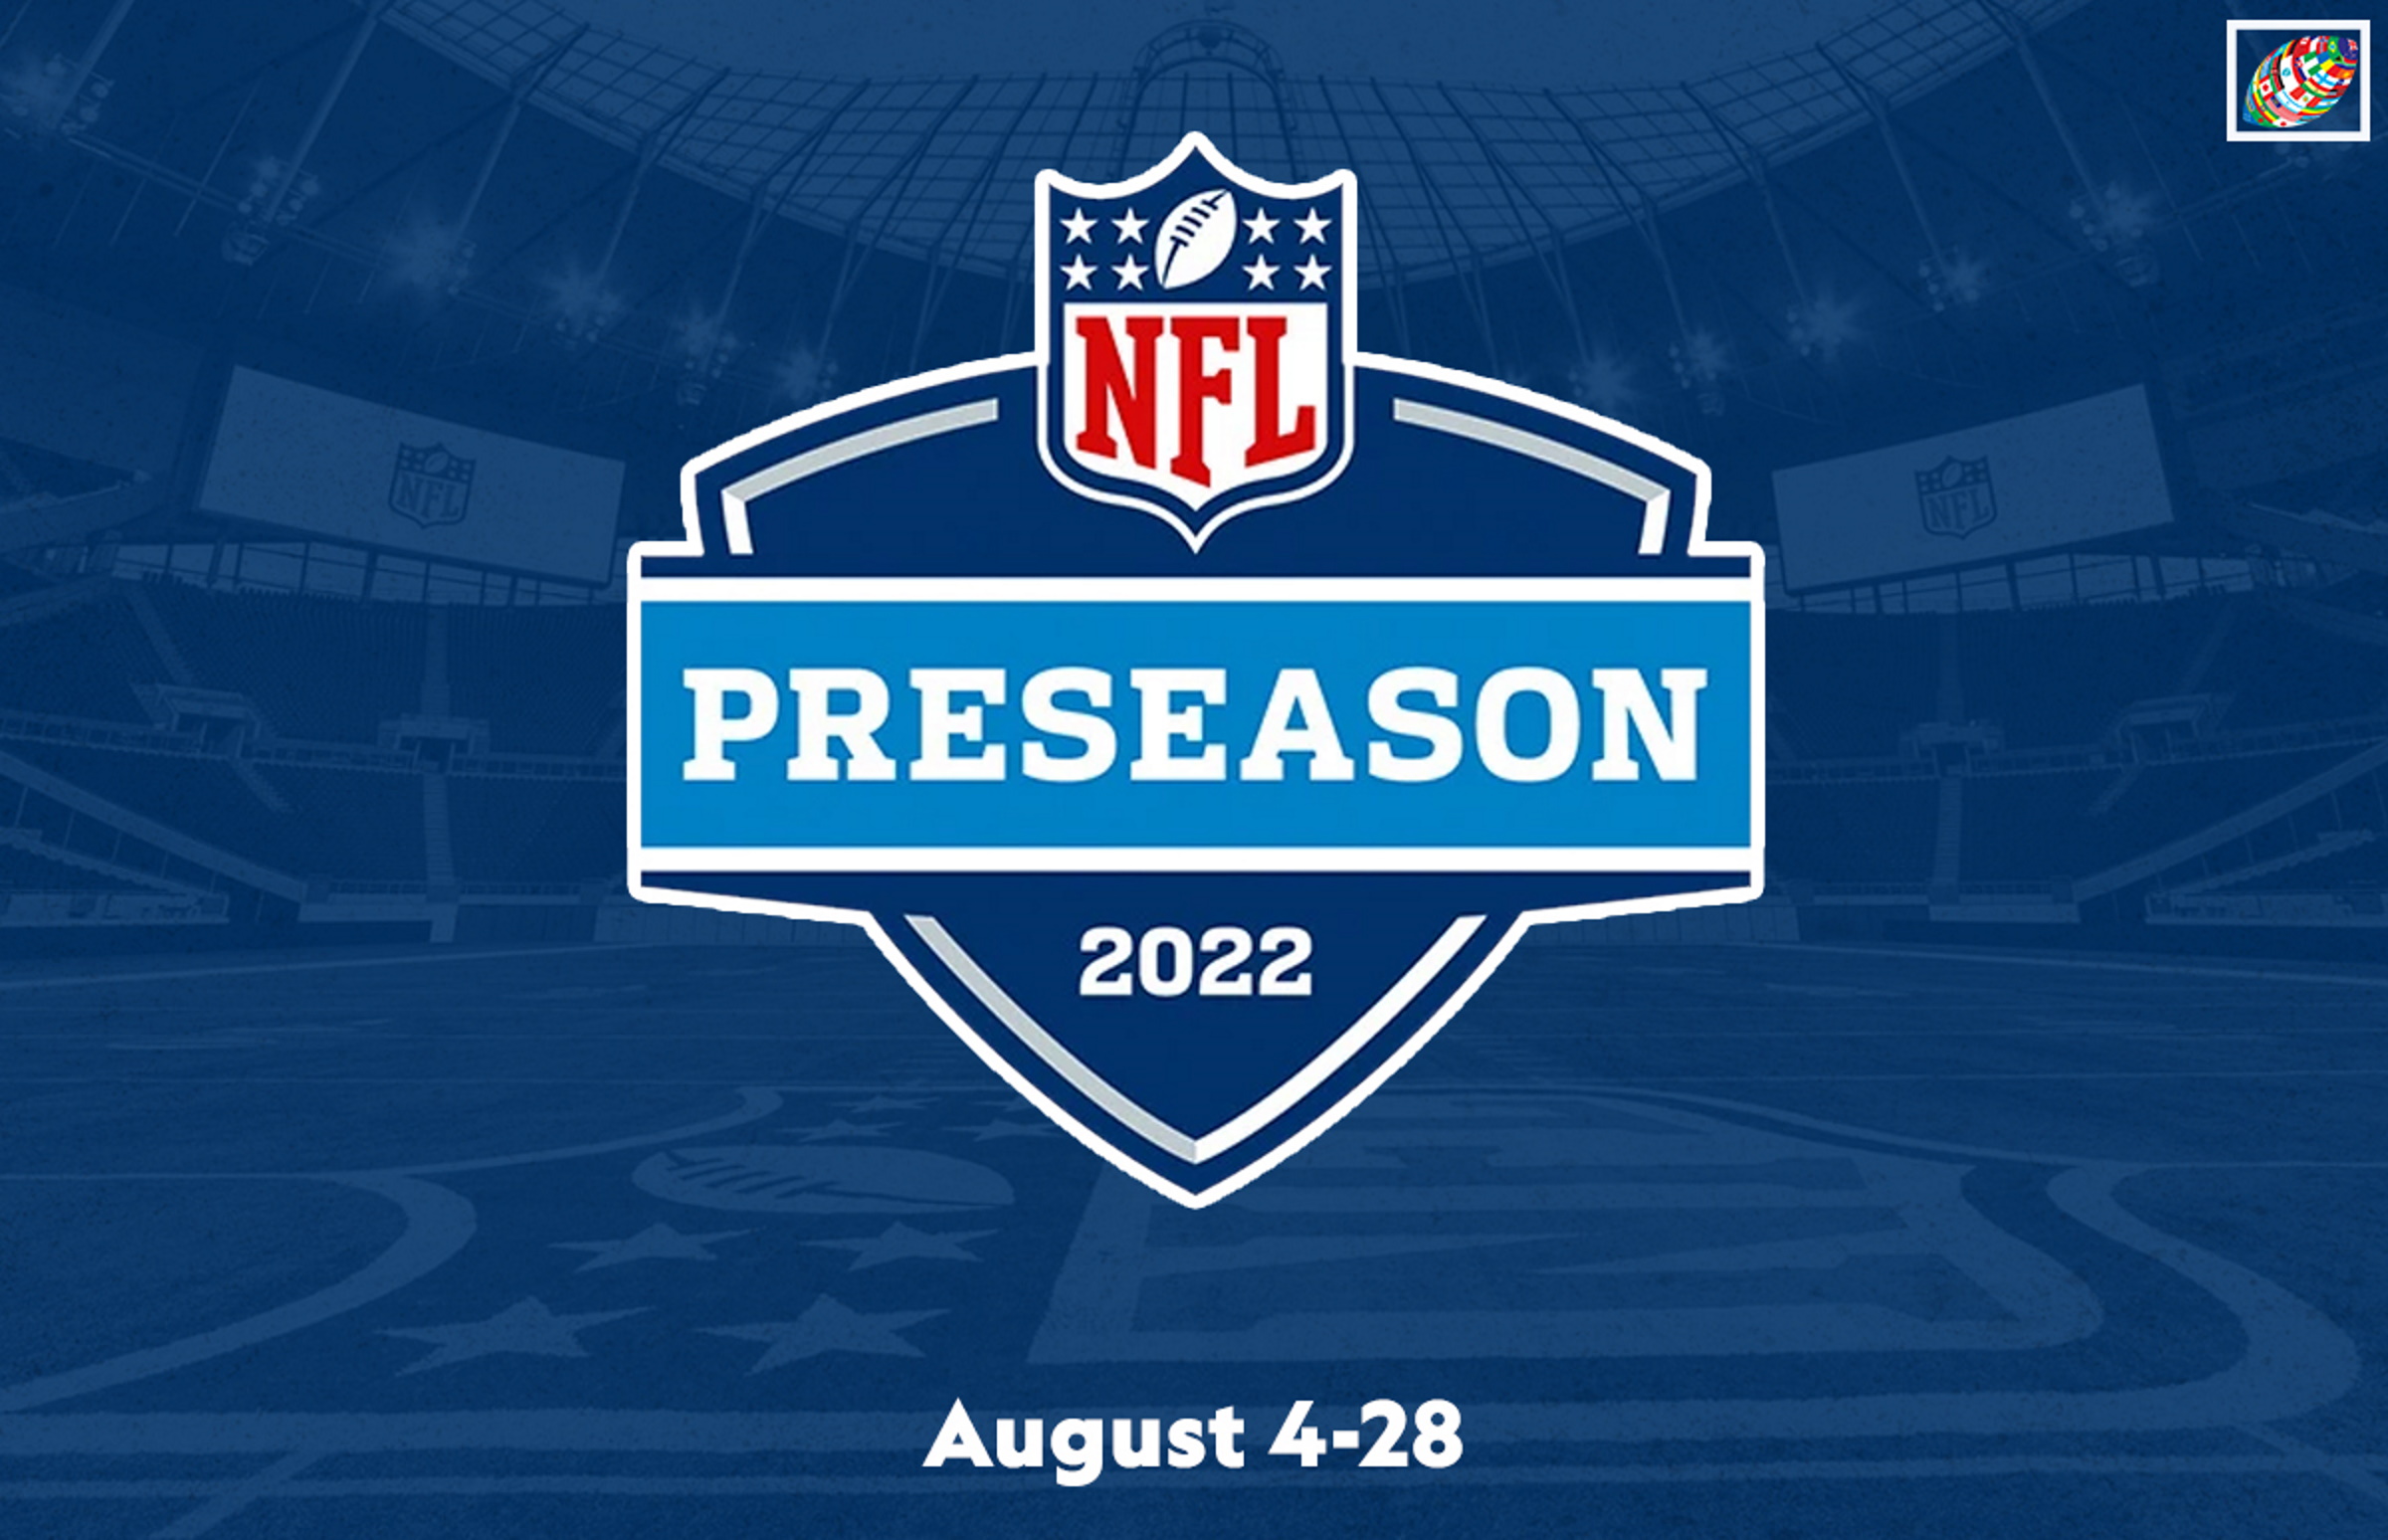 NFL preseason schedule 2022 dates, times, live streams online, TV channels, and more